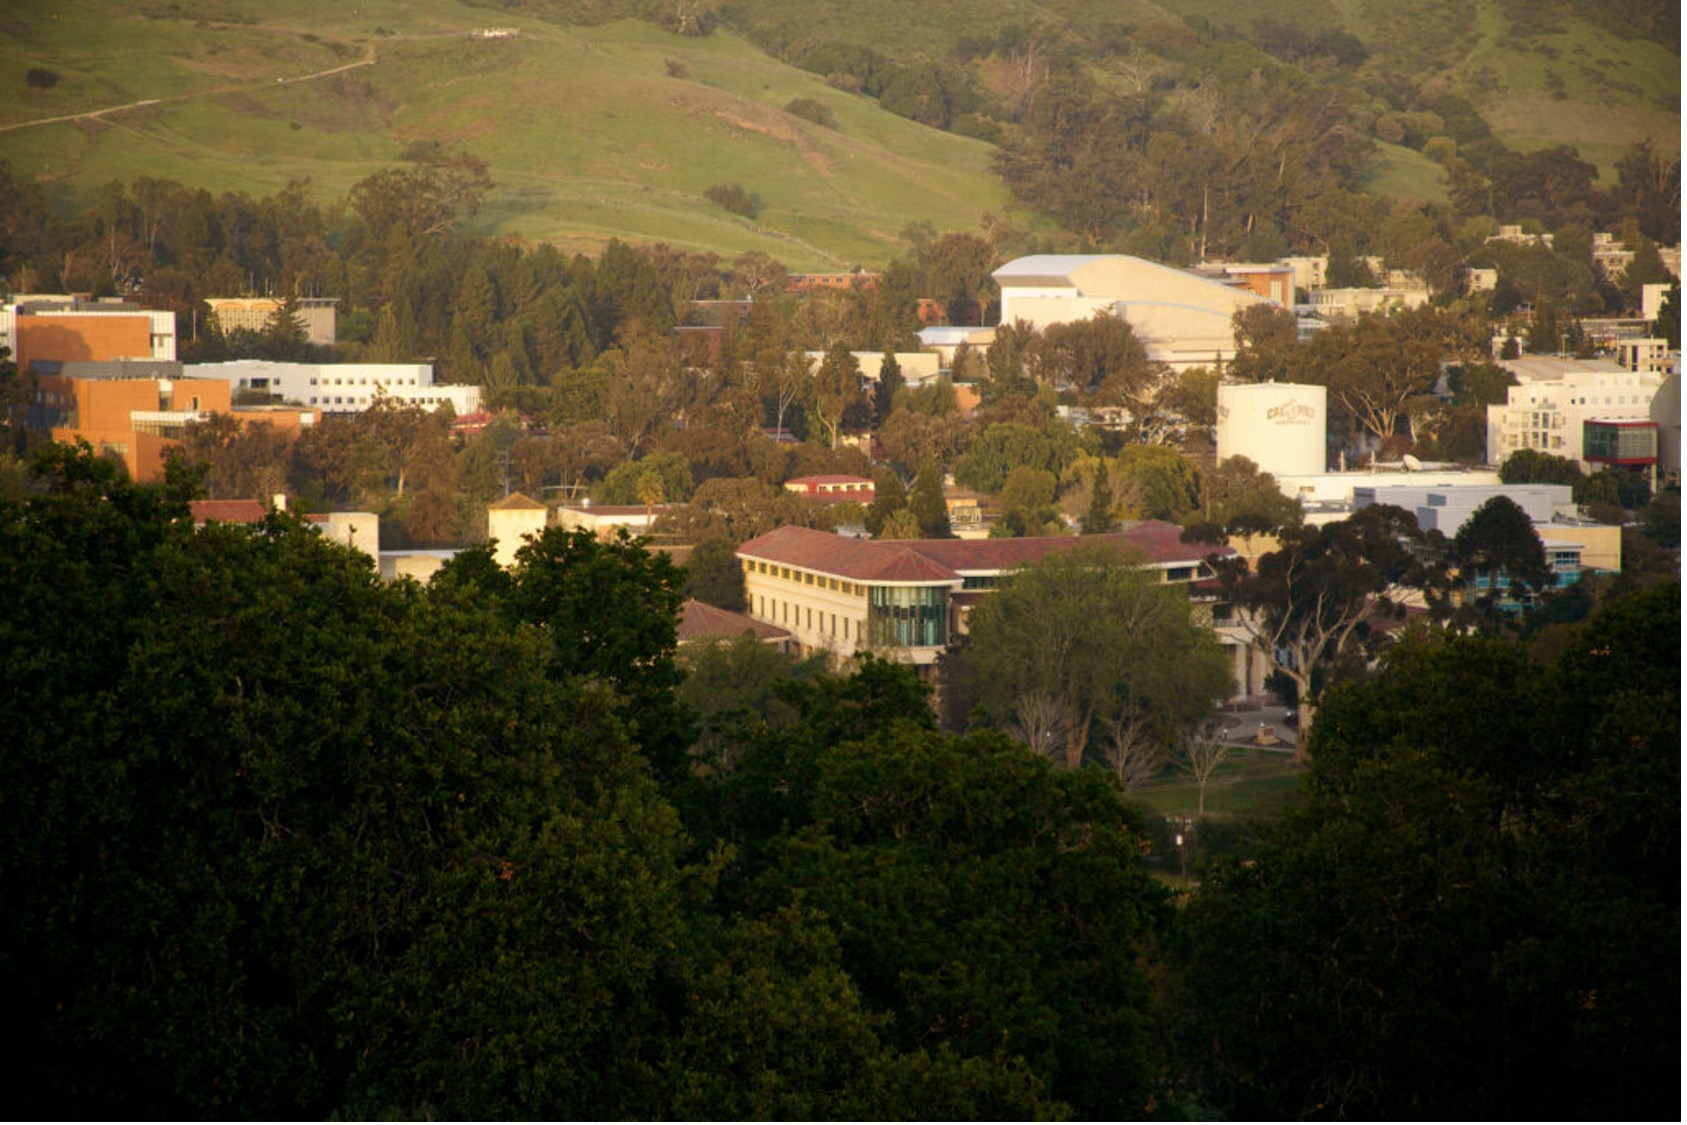 The Cal Poly campus, including the Orfalea College of Business building, seen from an aerial view.